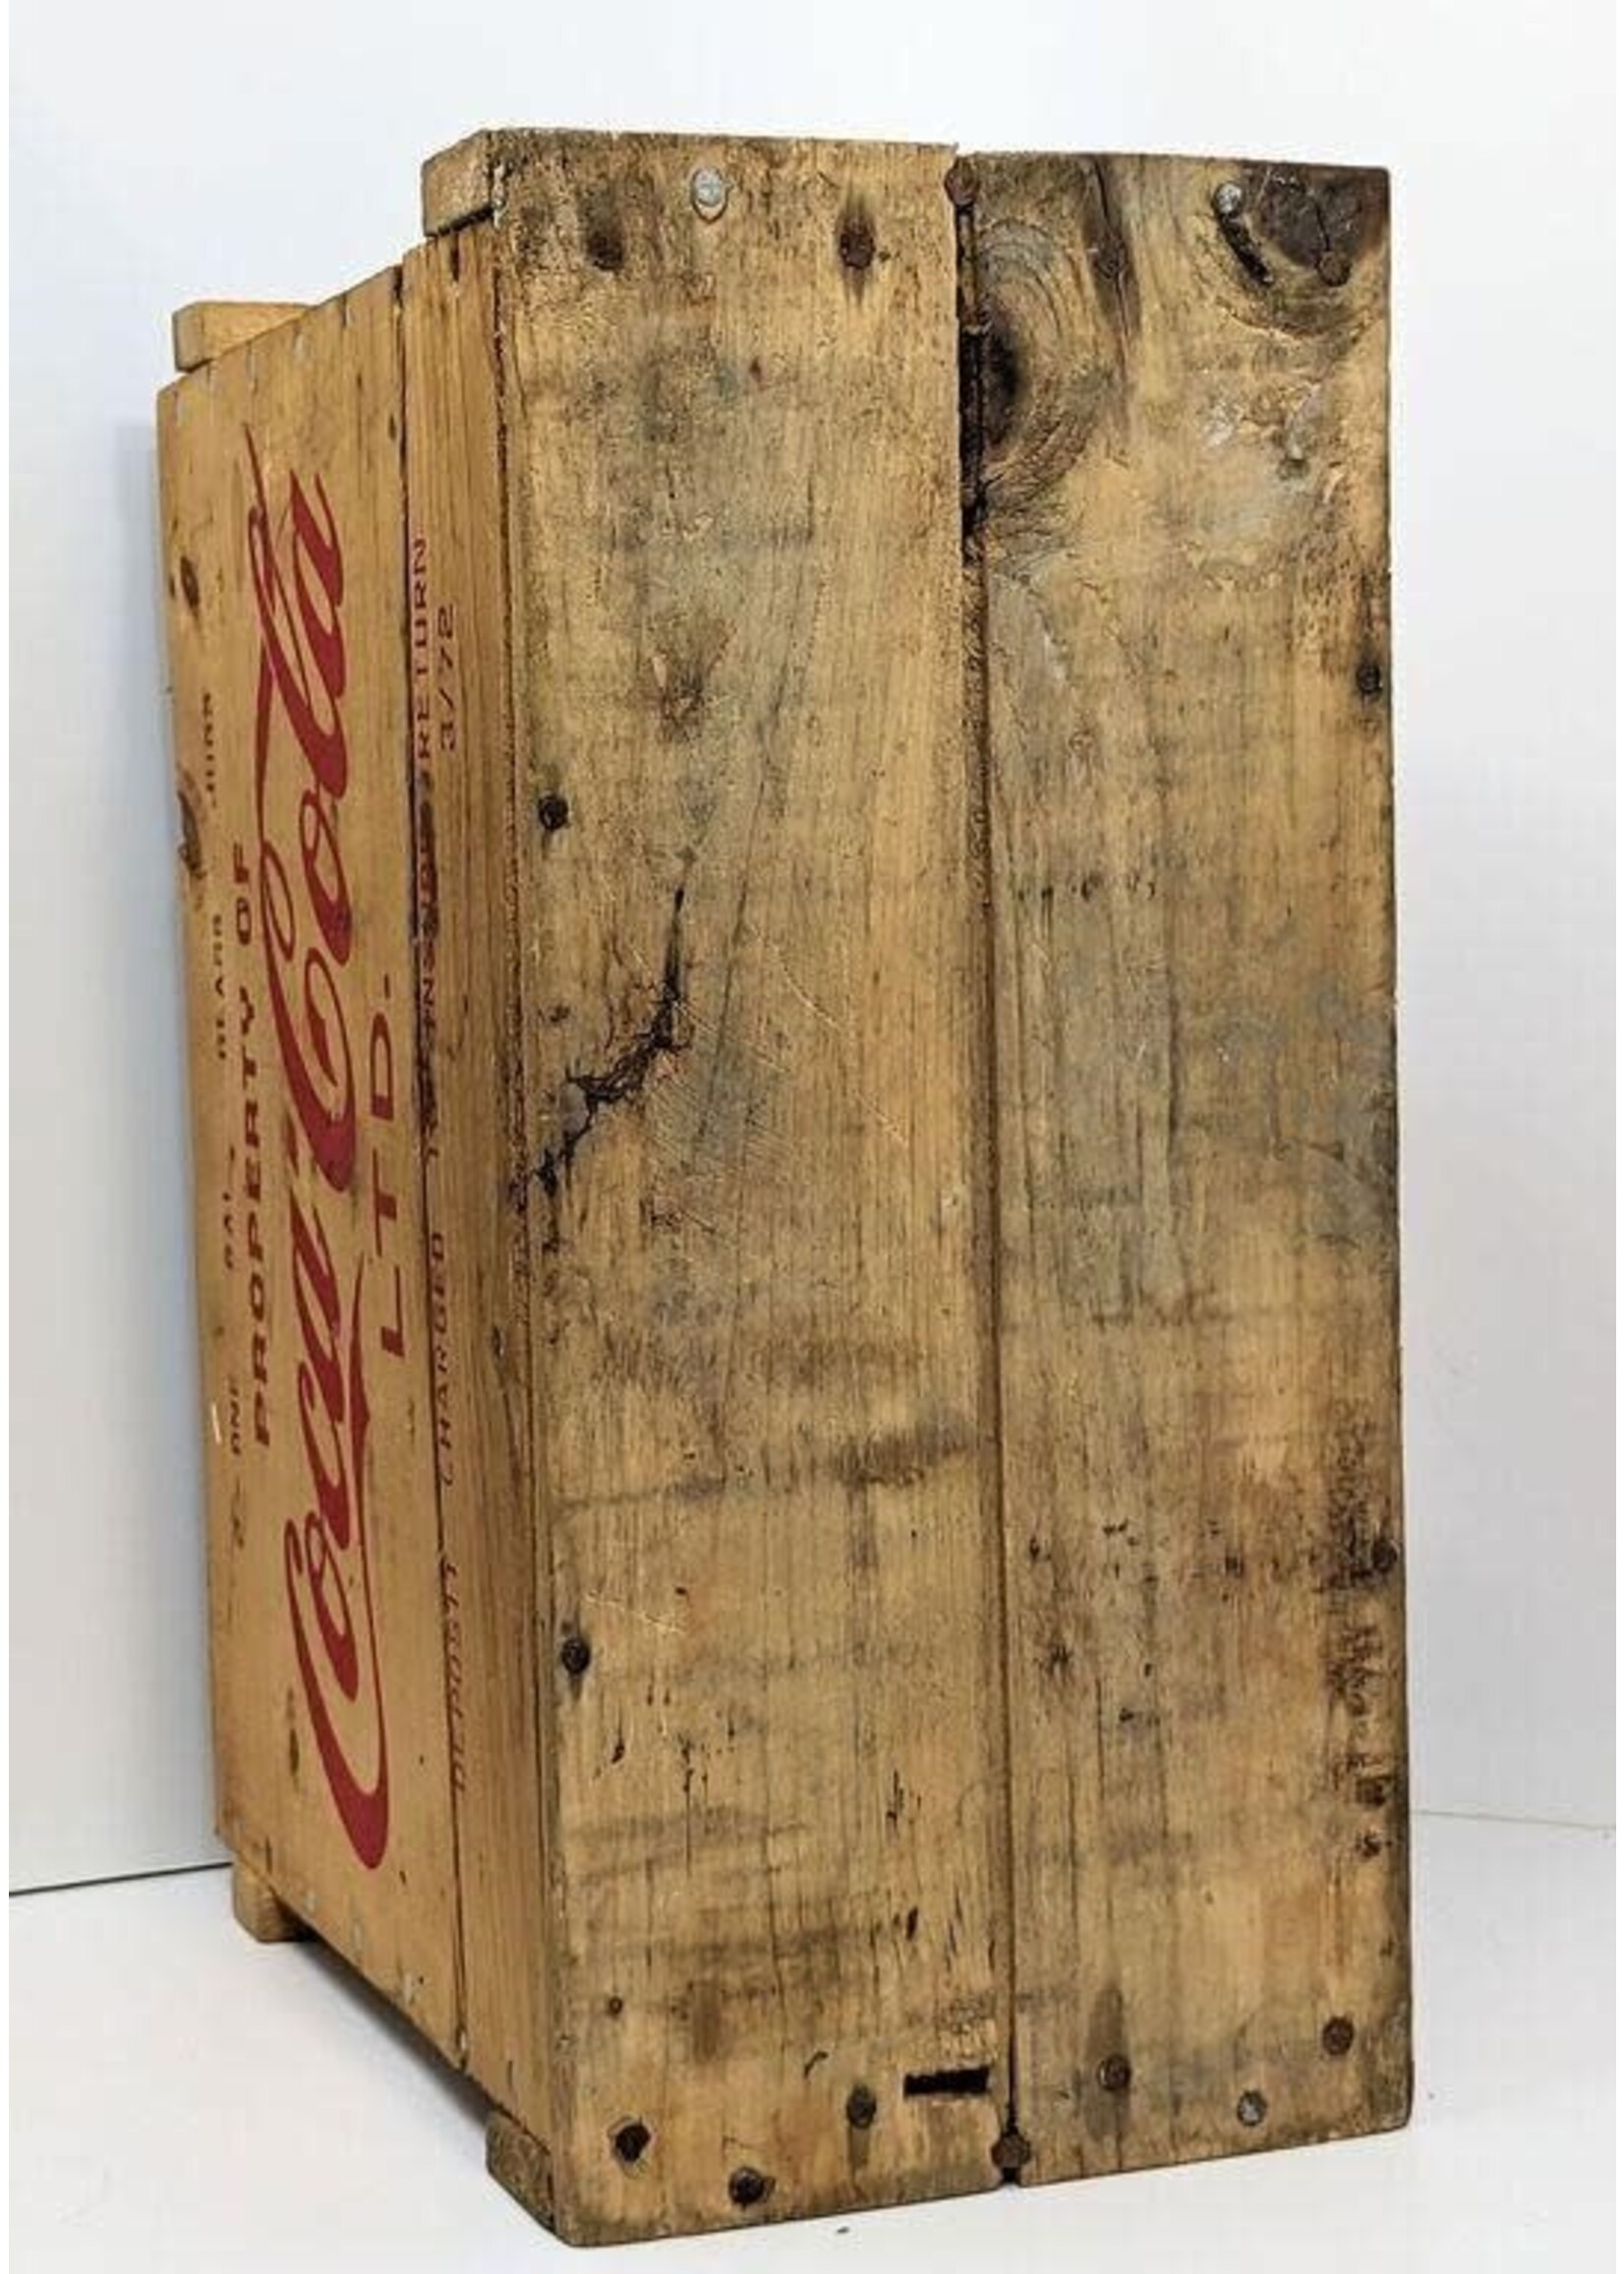 Coca-Cola Wooden Box - PICK UP ONLY